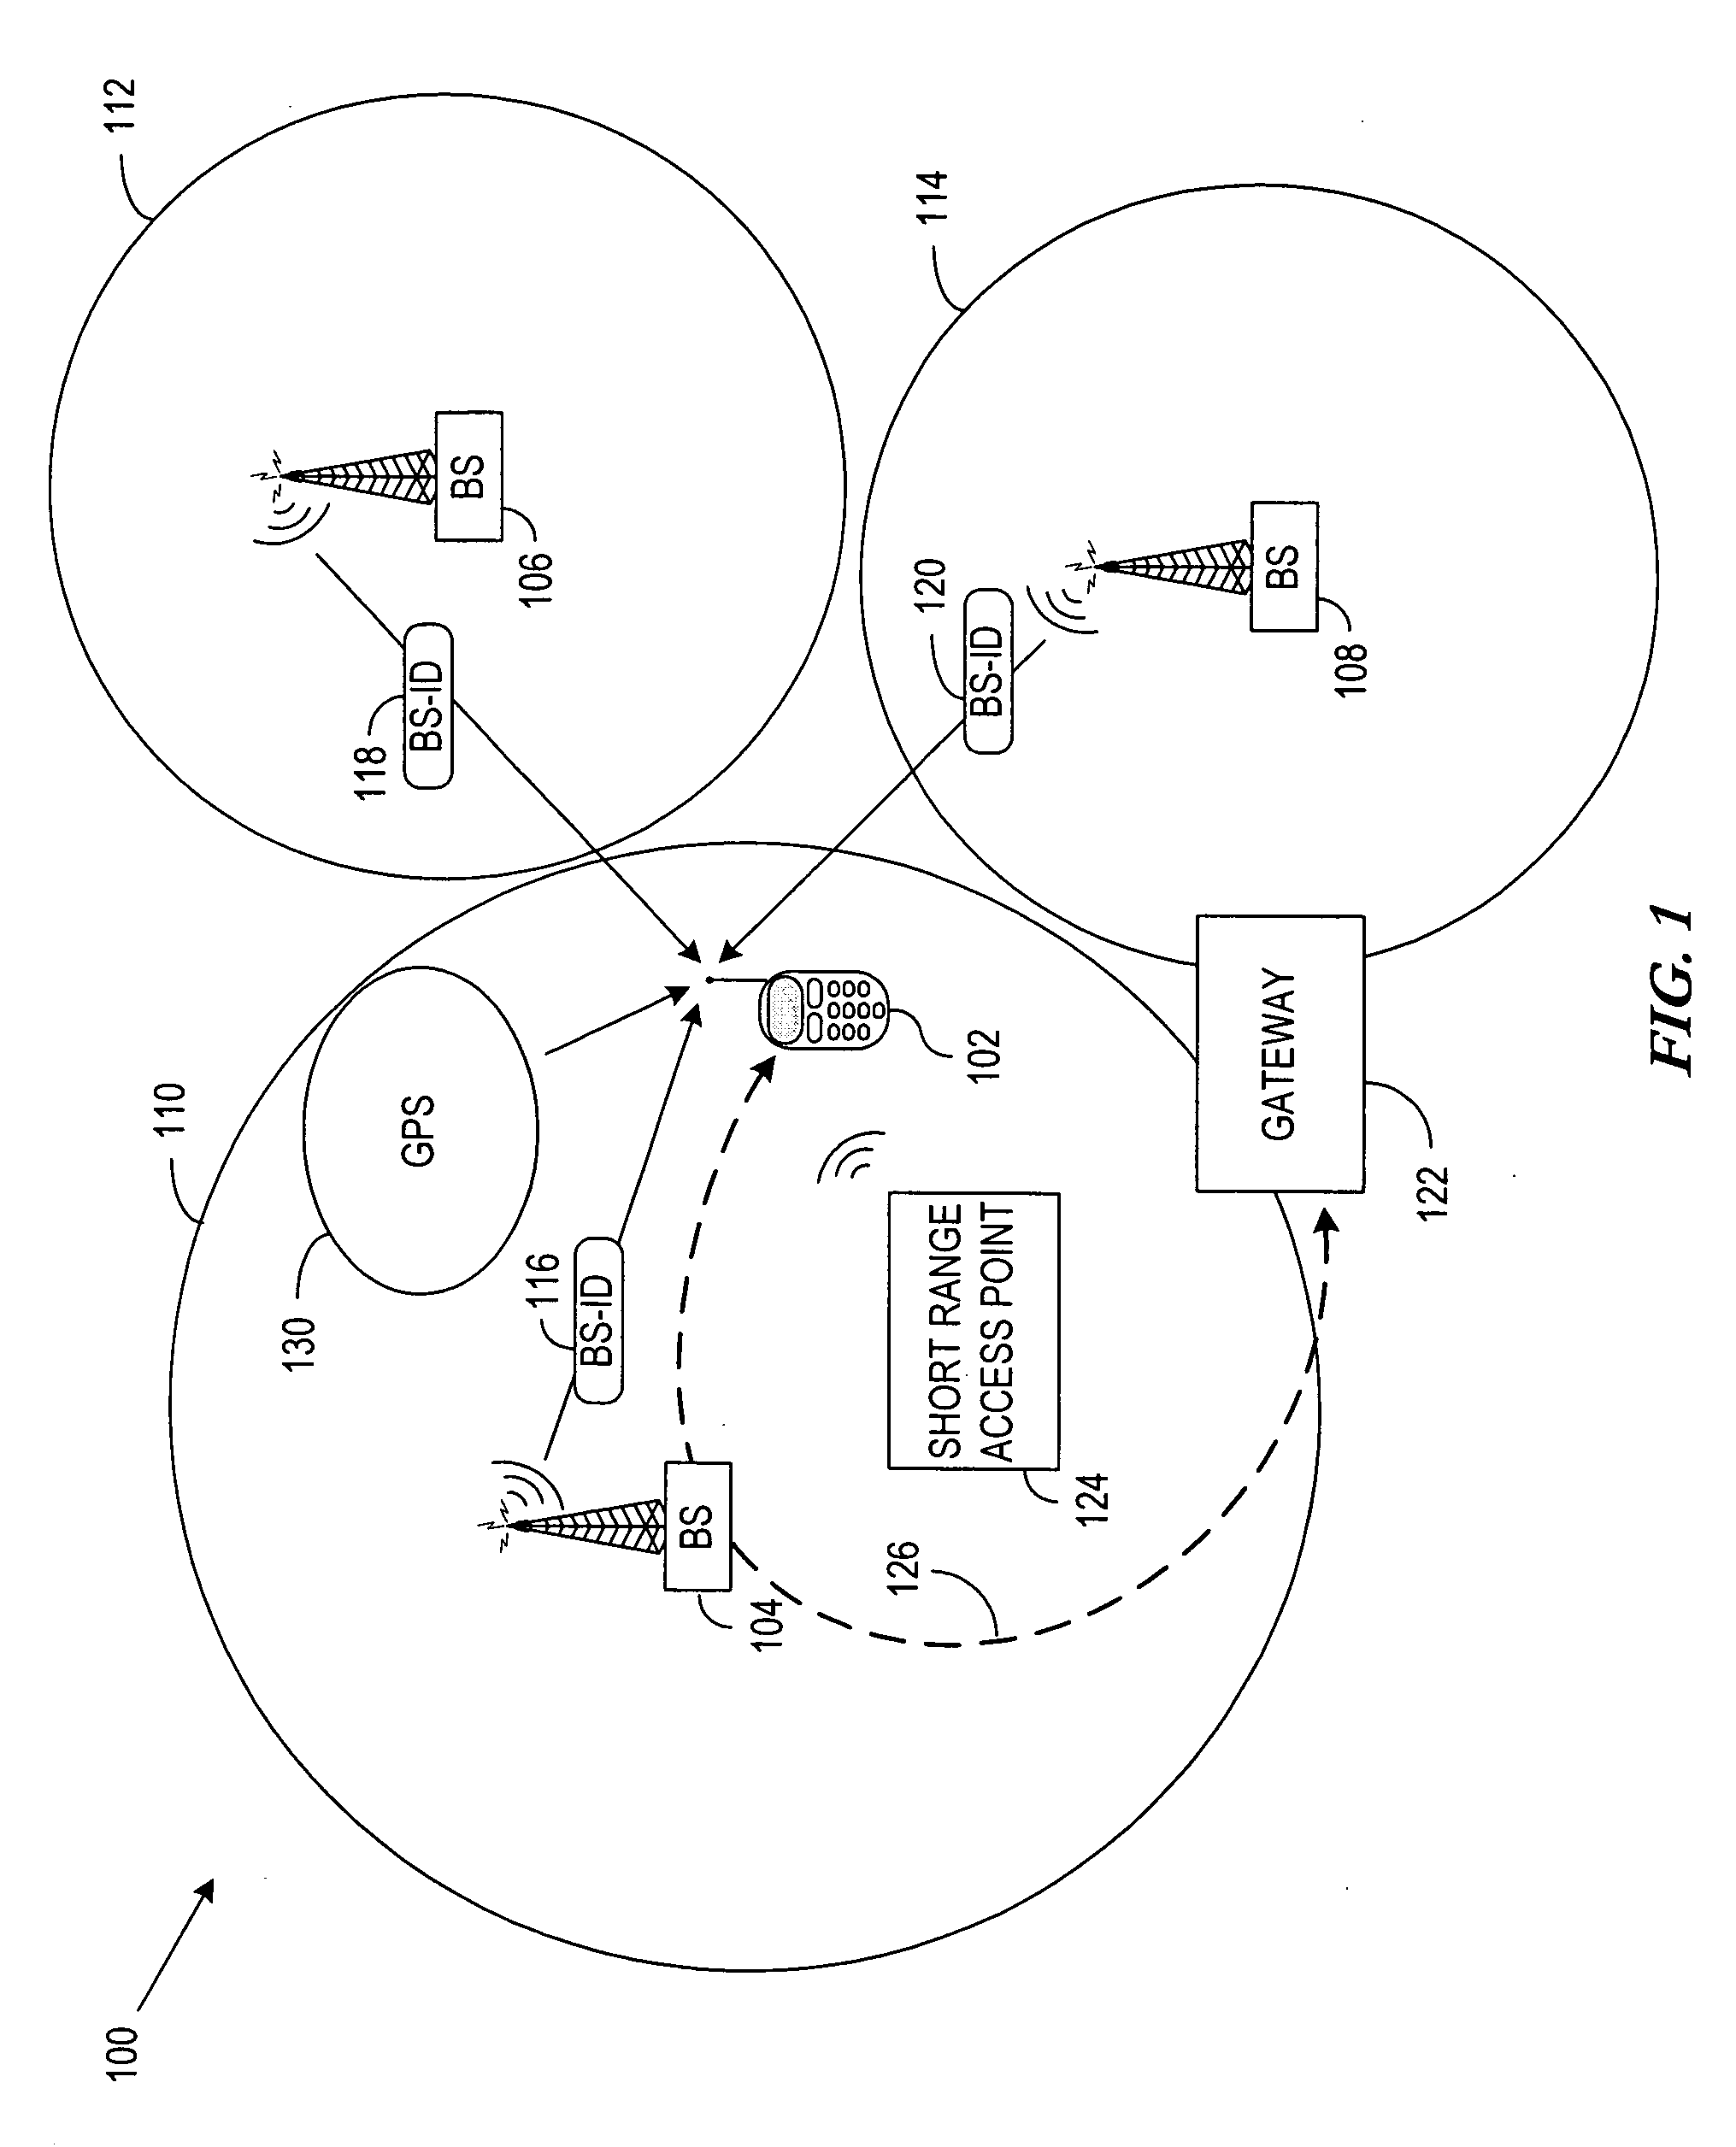 Method and apparatus for implementing a mobile web server based system